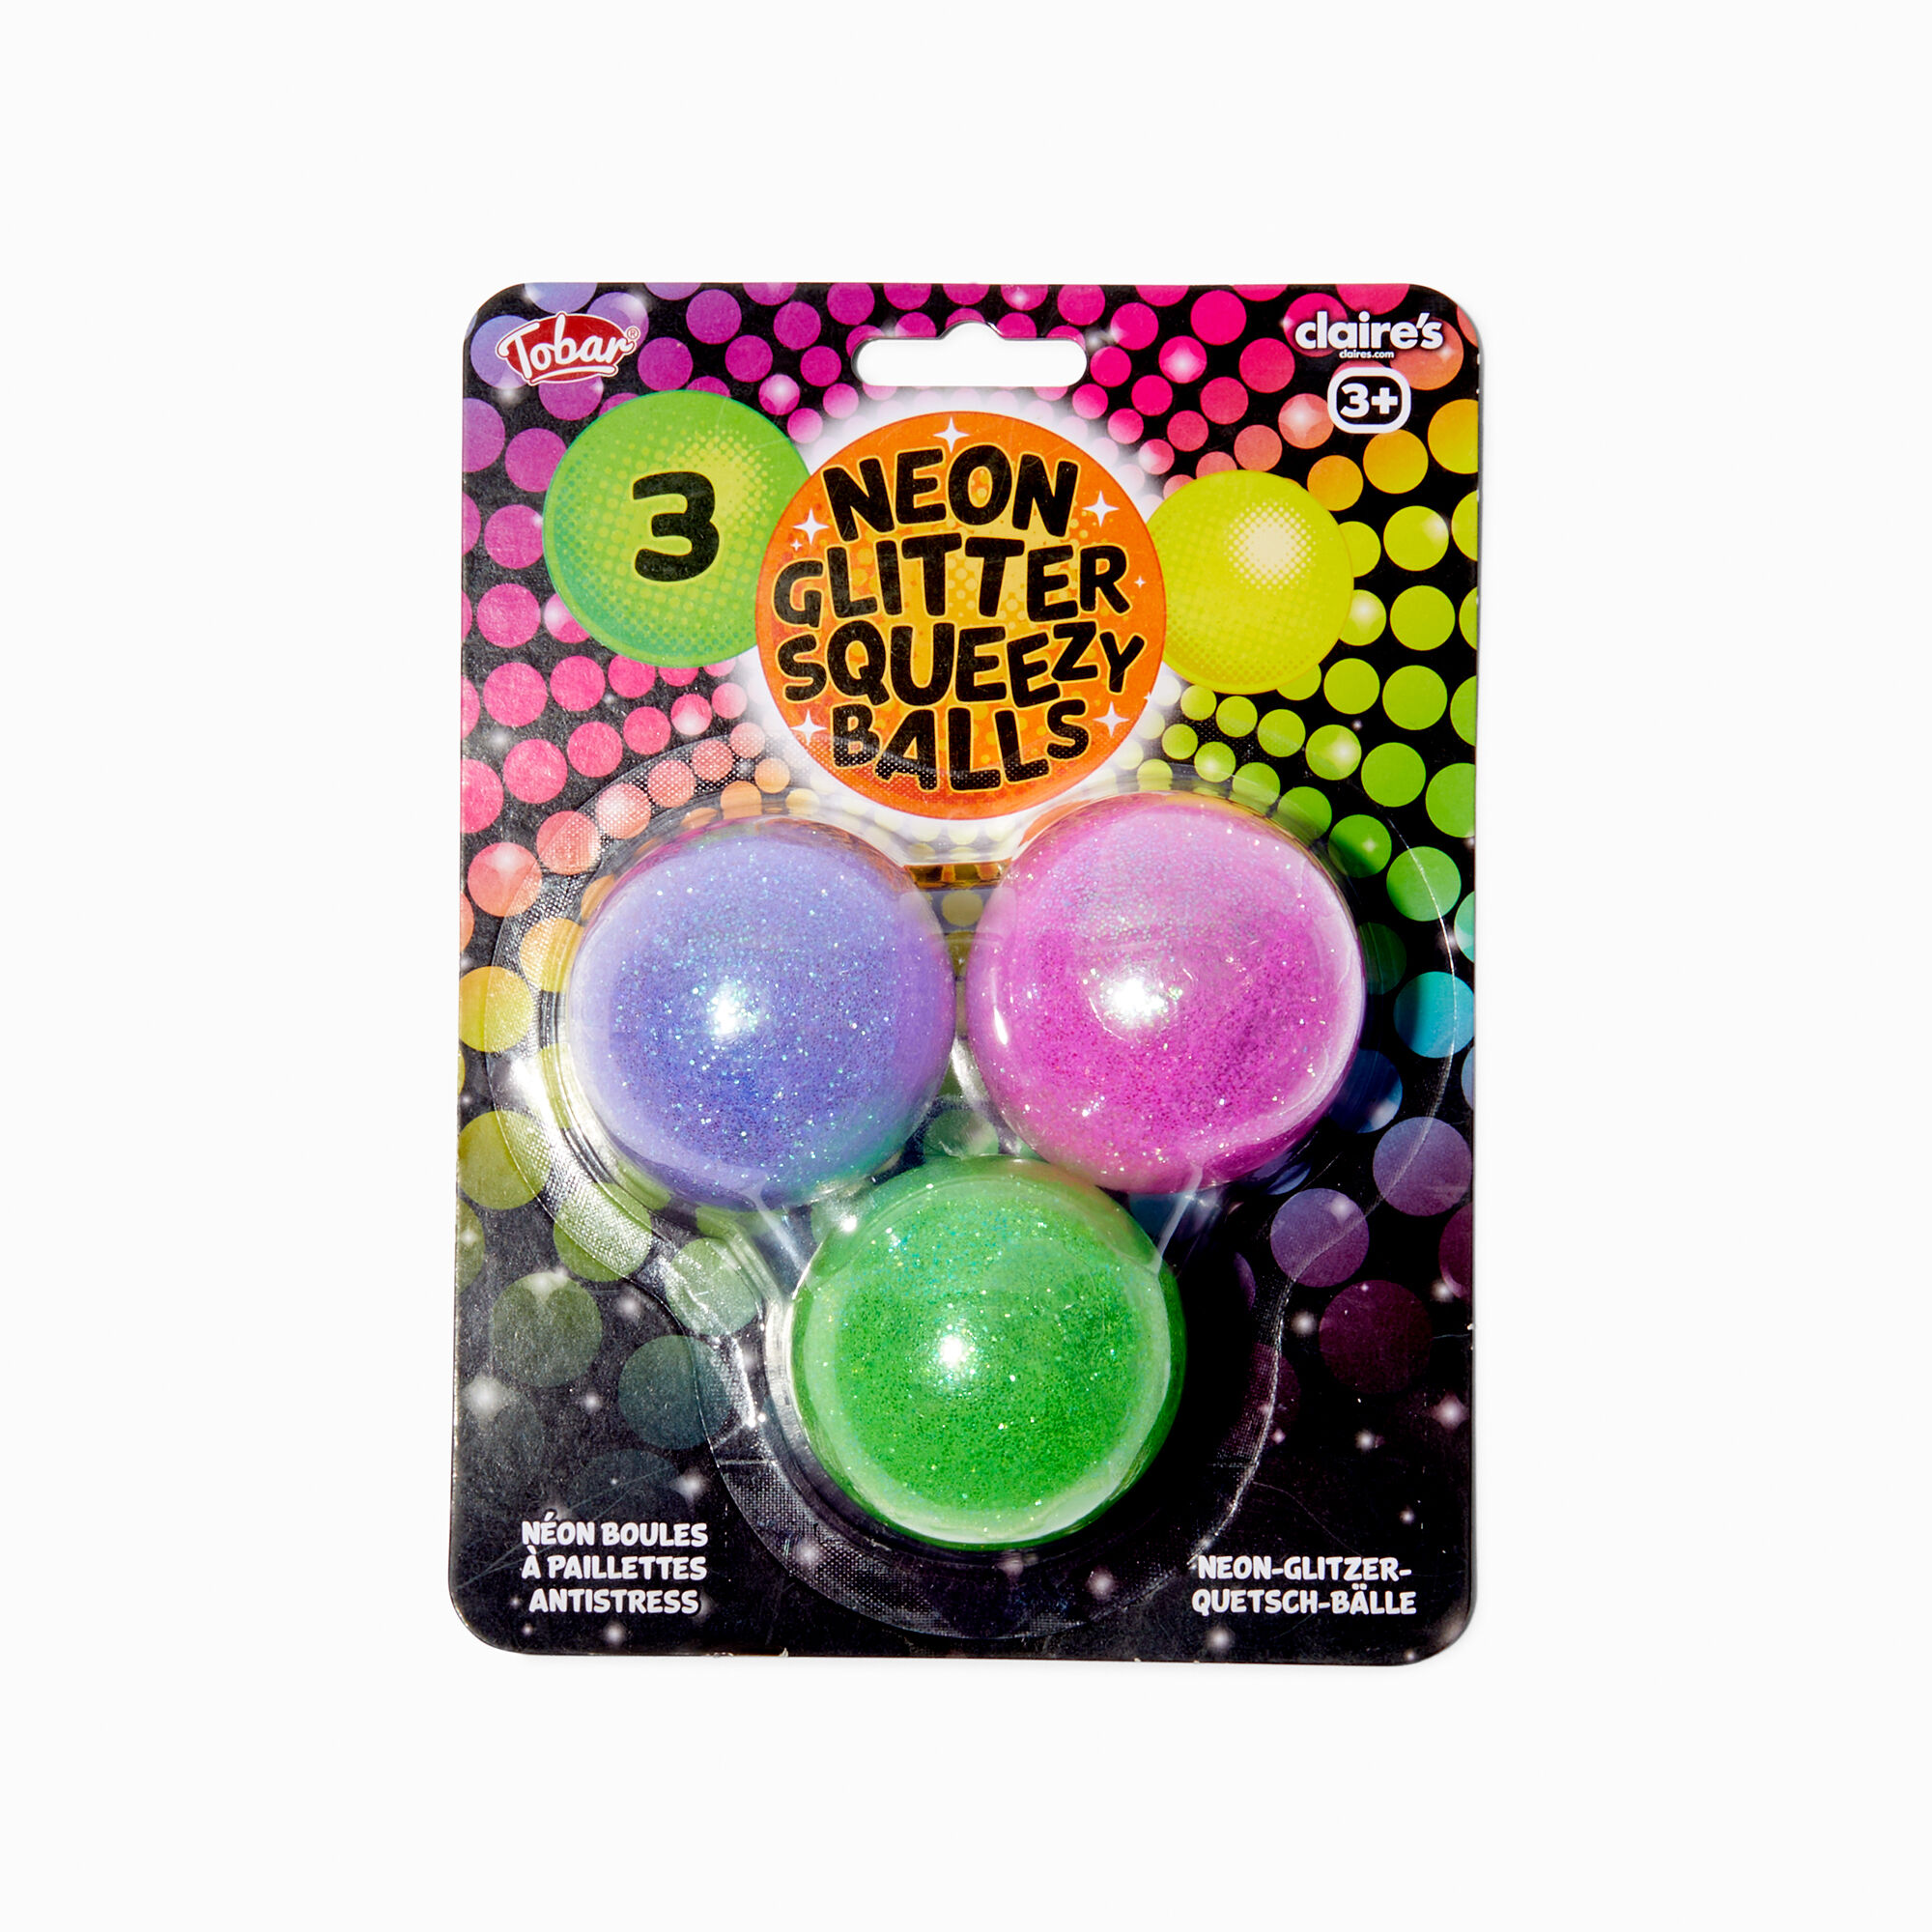 View Claires Neon Glitter Squeezy Balls Fidget Toy 3 Pack Styles May Vary information